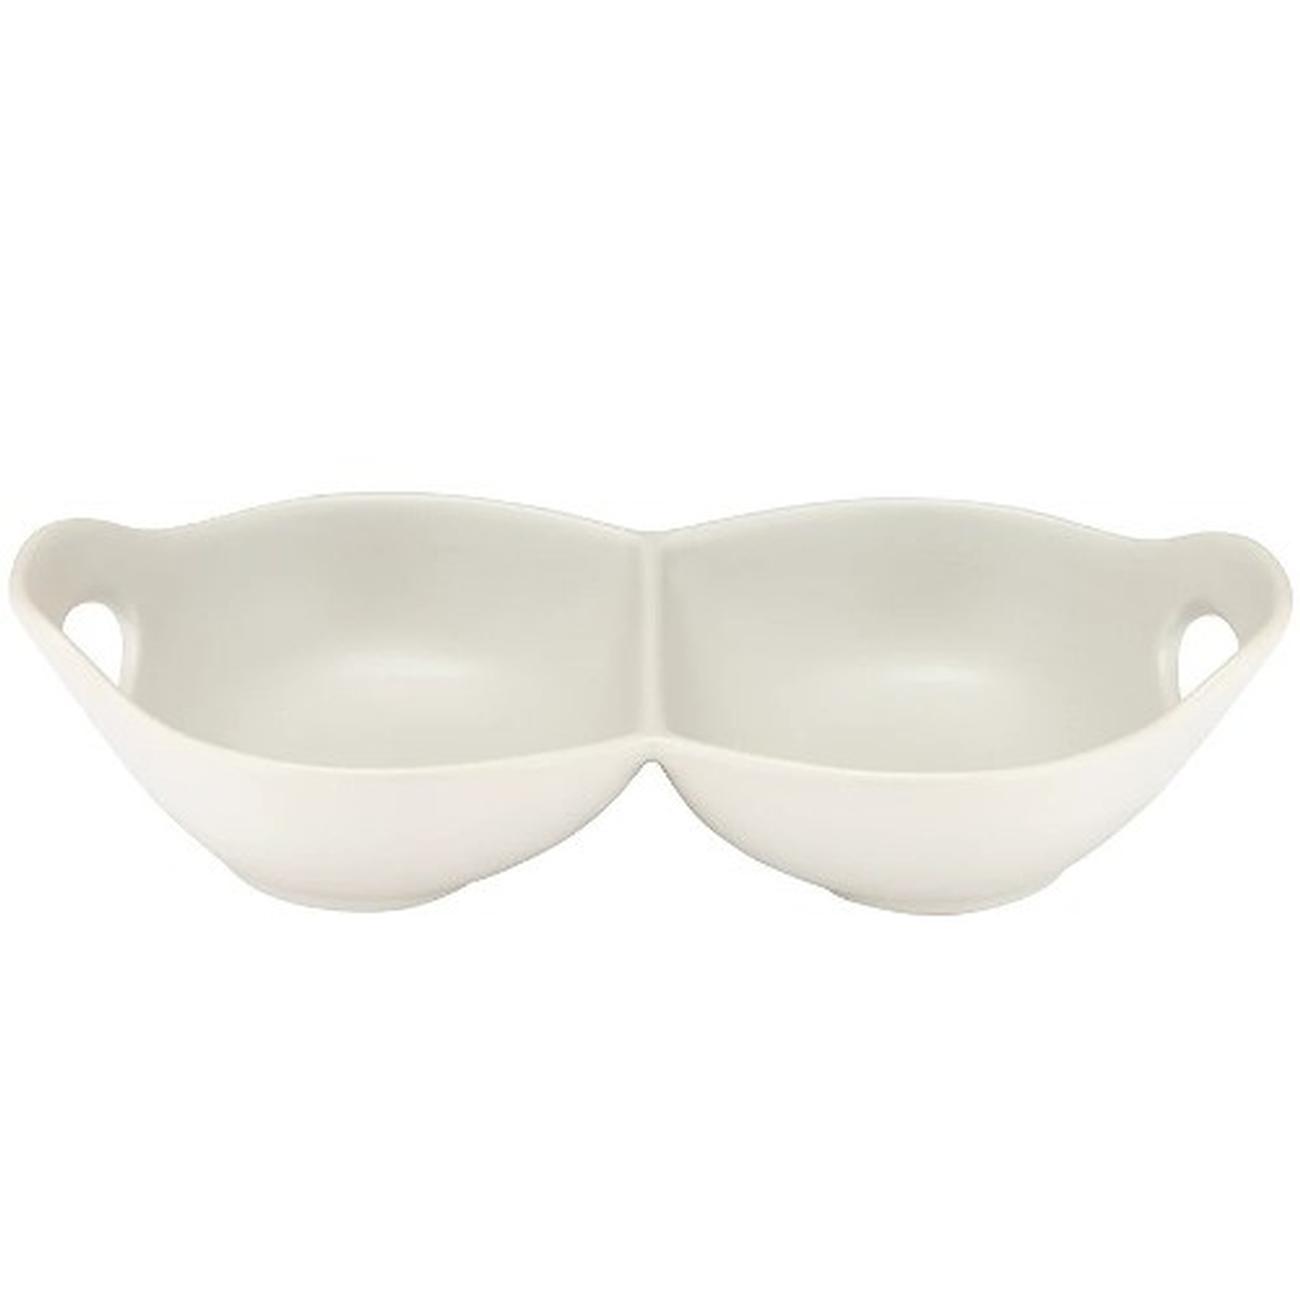 ladelle-host-two-part-handled-bowl-stone - Ladelle Host 2 Part Handled Bowl Stone